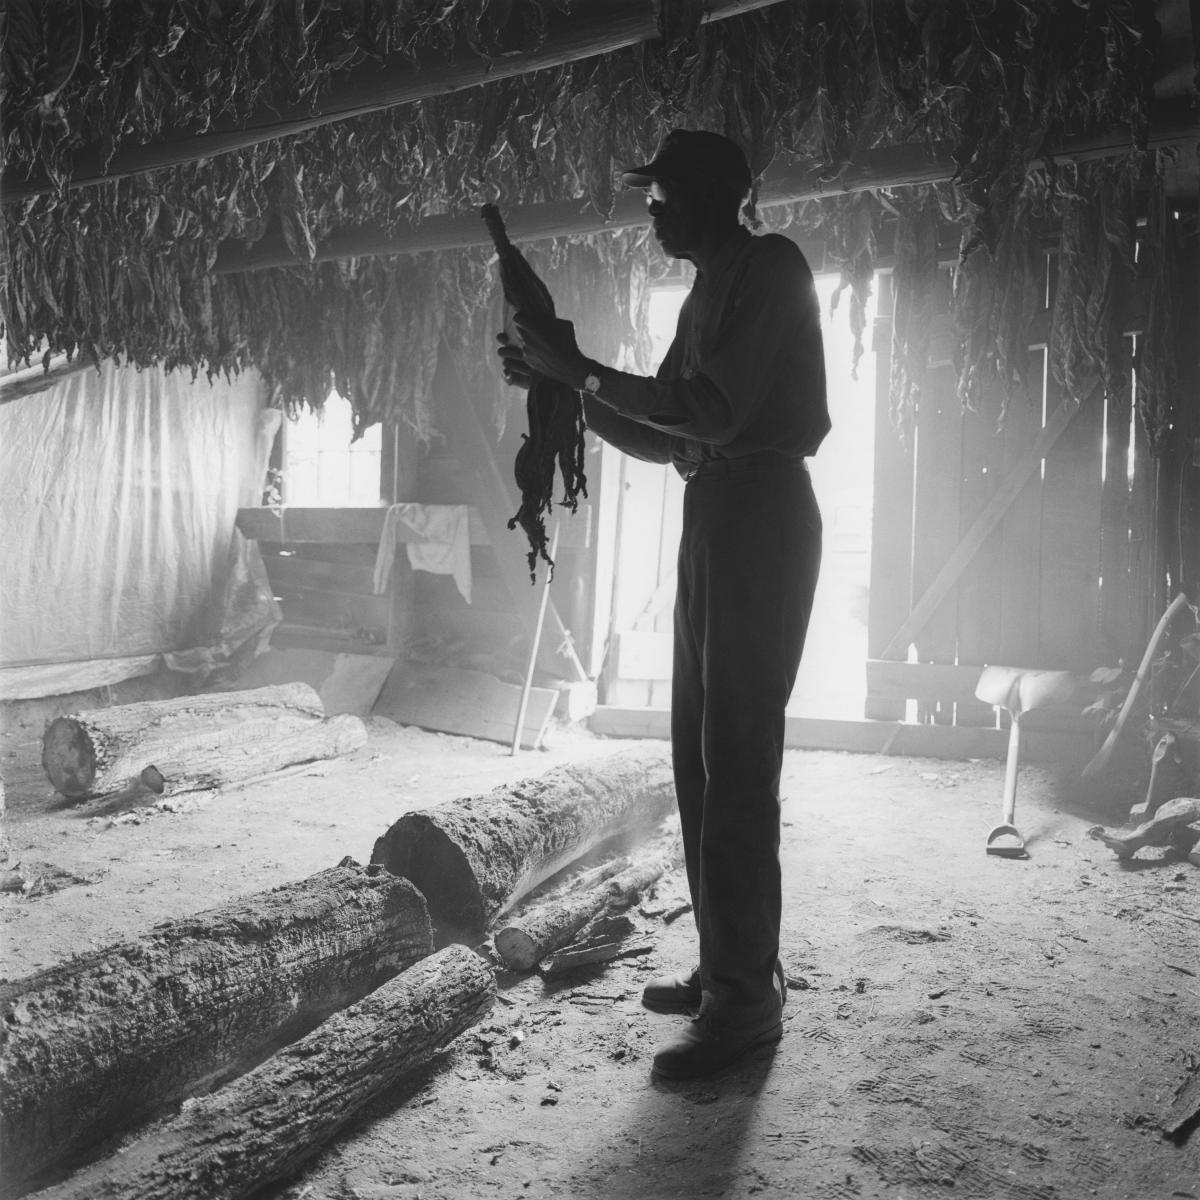 <p><center>Buckinham County, Virginia:</center></p>
Weeks after removing tobacco from the field, Hoover Johnson inspects some tied leaves that have been curing. Unlike newer tobacco barns constructed of metal and heated with gas, Johnson's wooden barn uses a large smoldering log  for heating and curing. : Images : AMERICAN BLACK FARMERS PROJECT - John Ficara